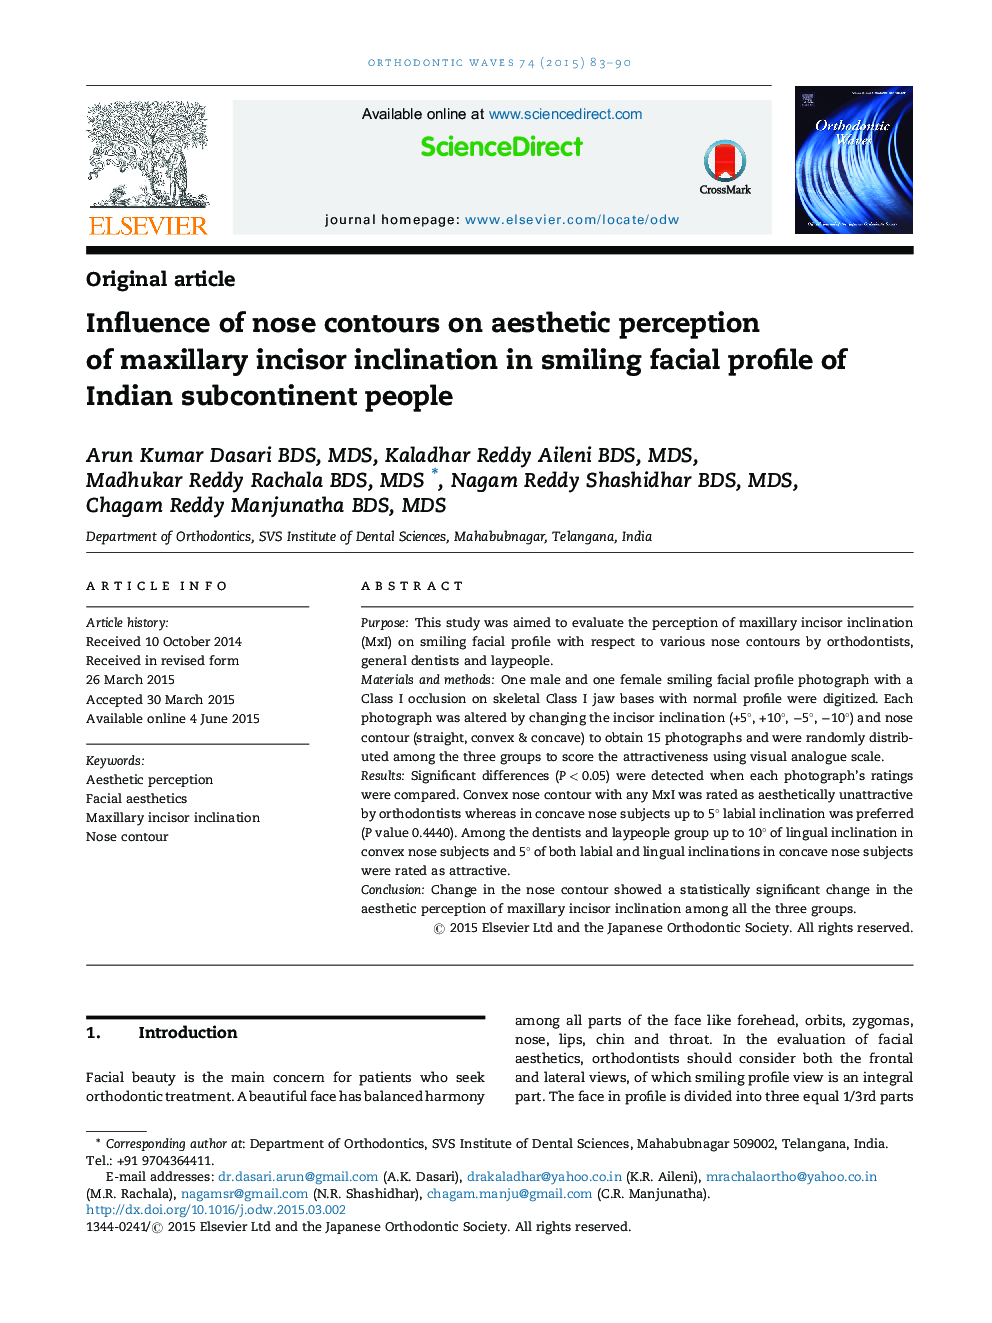 Influence of nose contours on aesthetic perception of maxillary incisor inclination in smiling facial profile of Indian subcontinent people